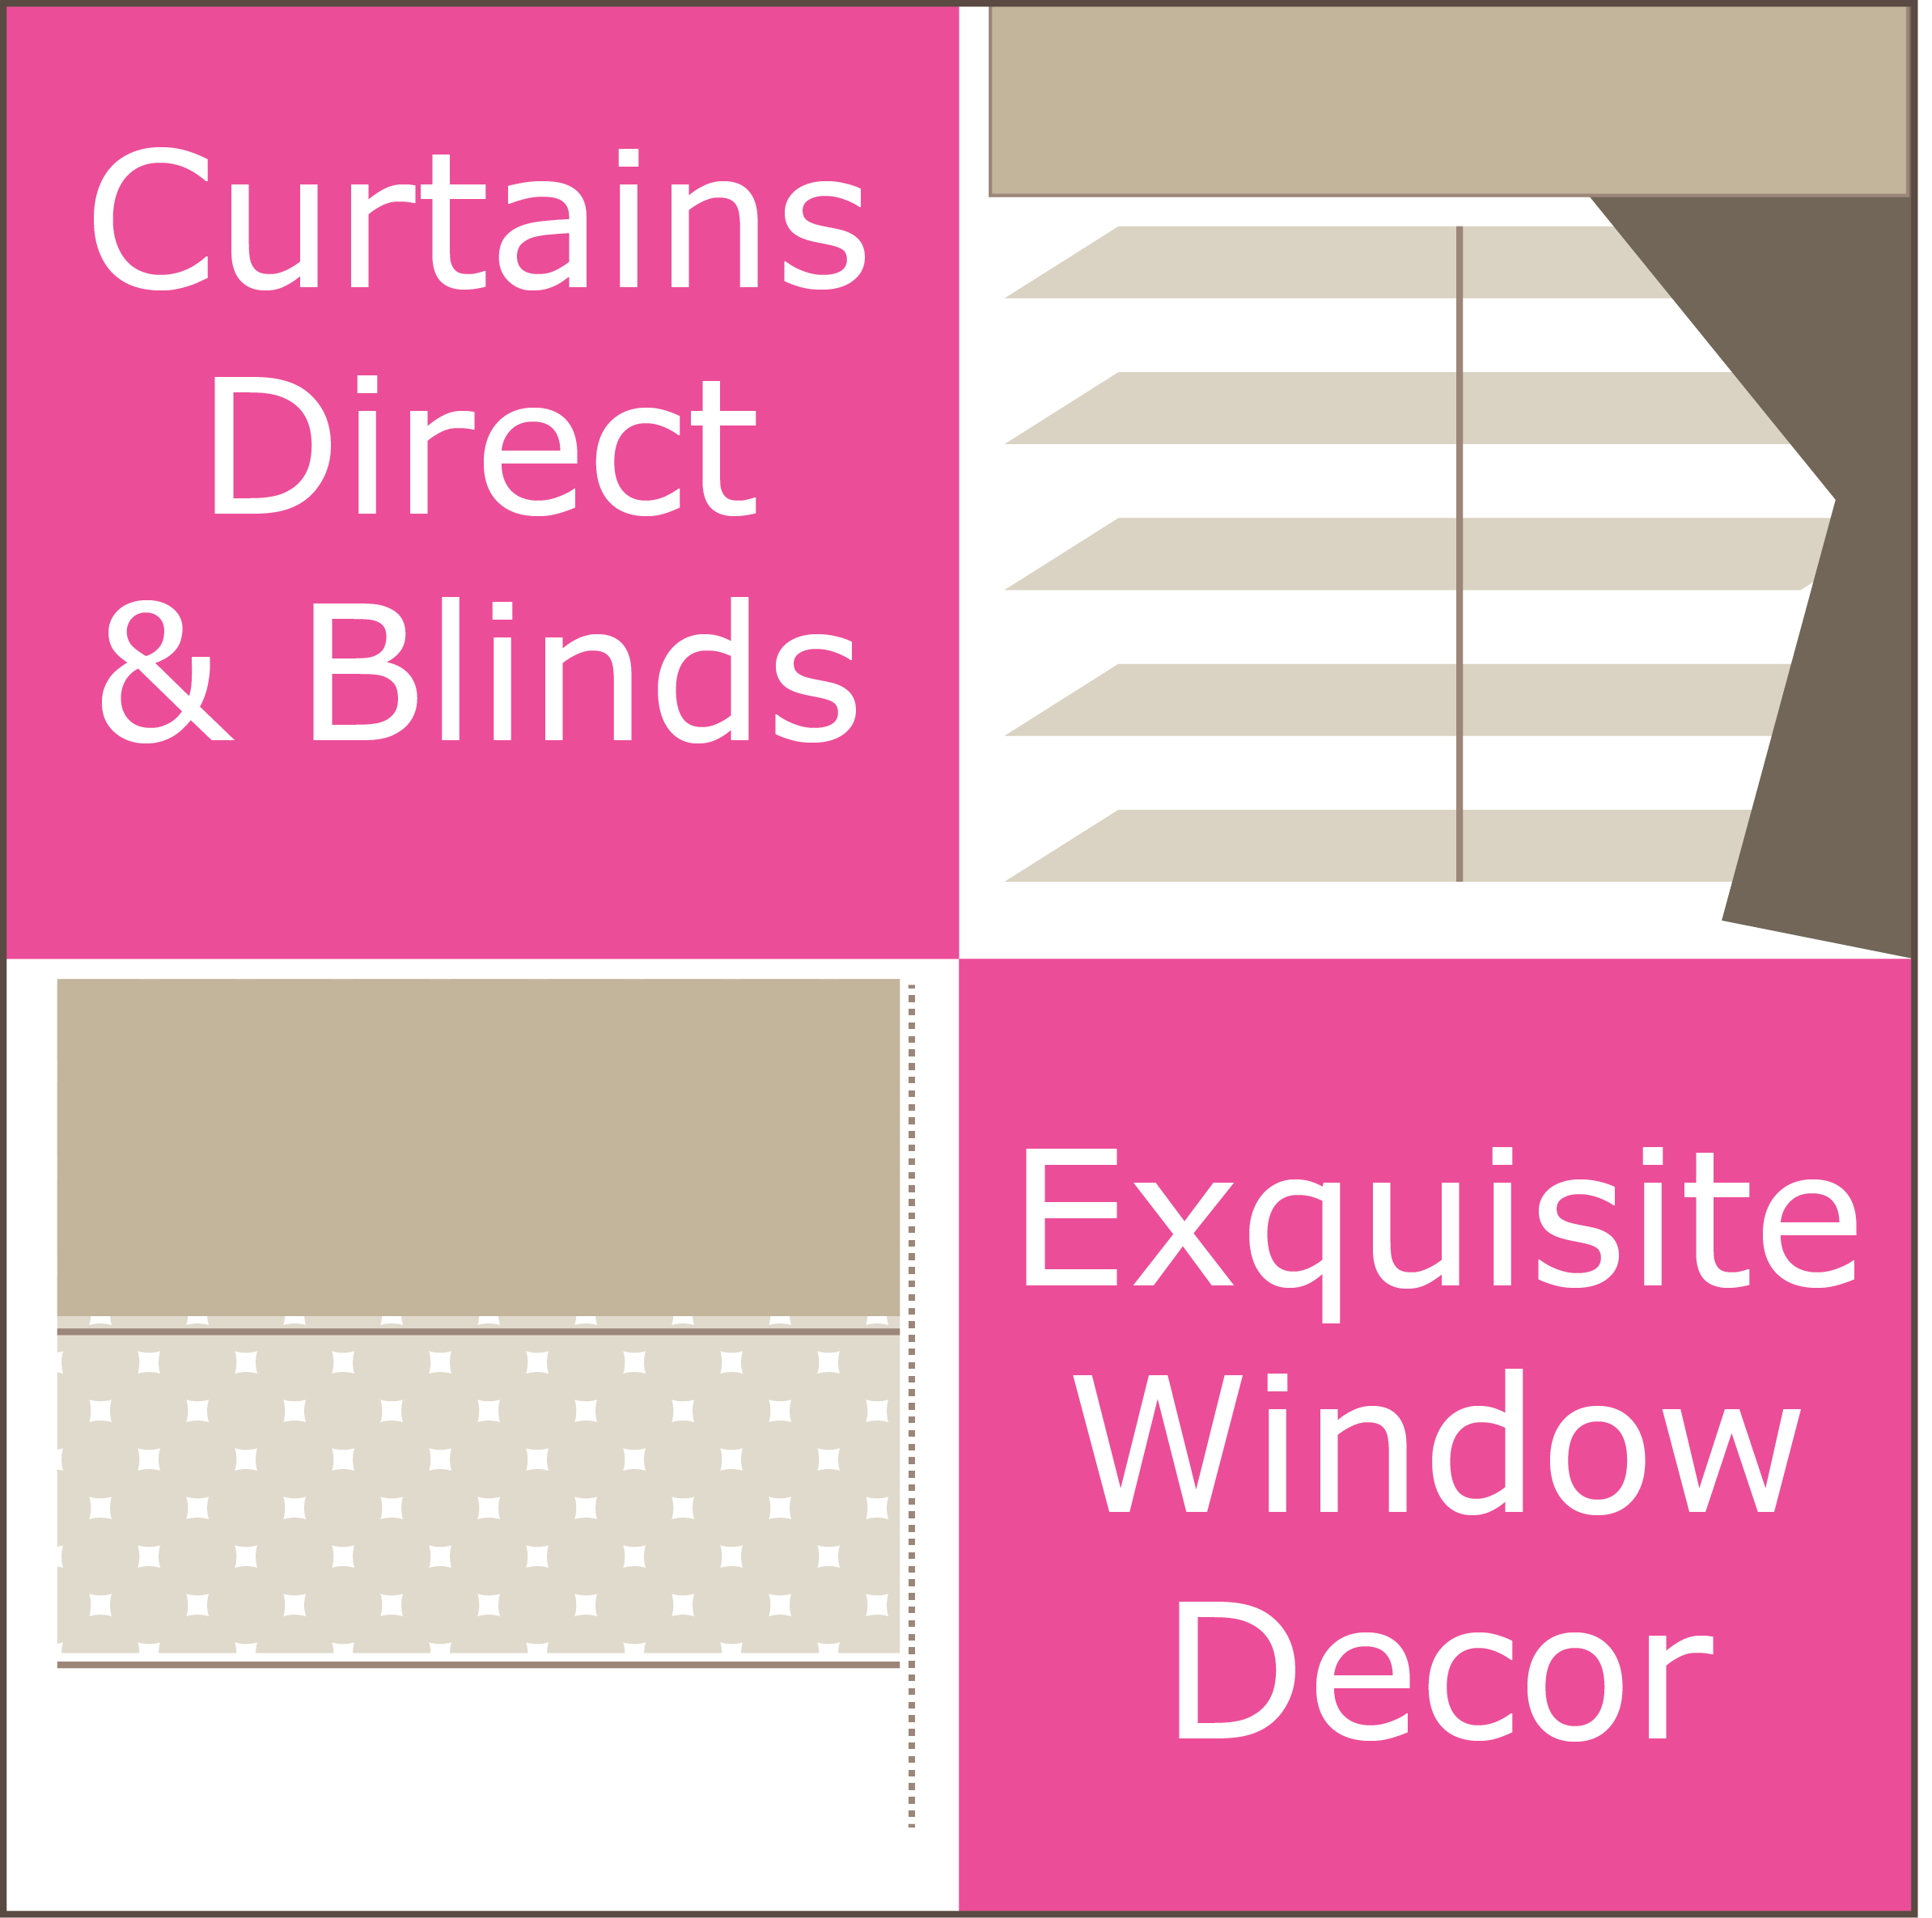 Curtains Direct & Blinds